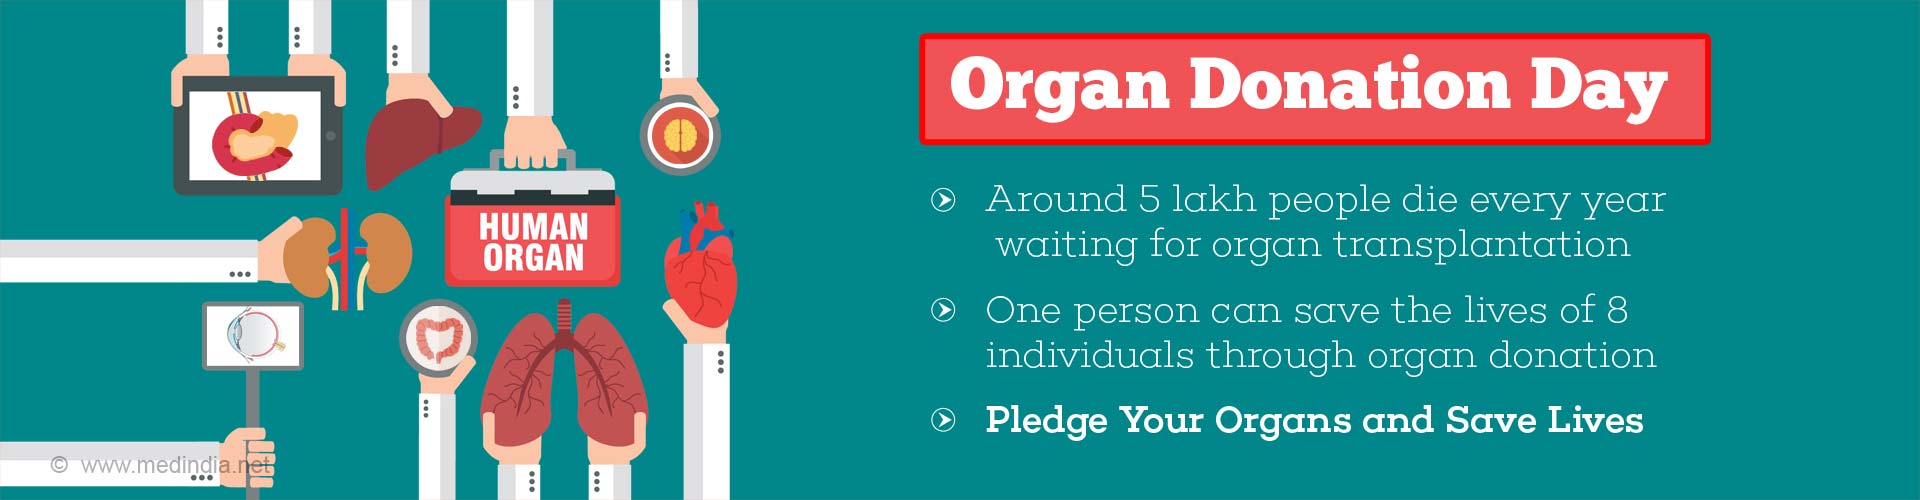 organ donation day
- around 5lakh people die every year waiting for organ transplantation
- one person can save the lives of 8 individuals through organ donation
- pledge your organs and save lives